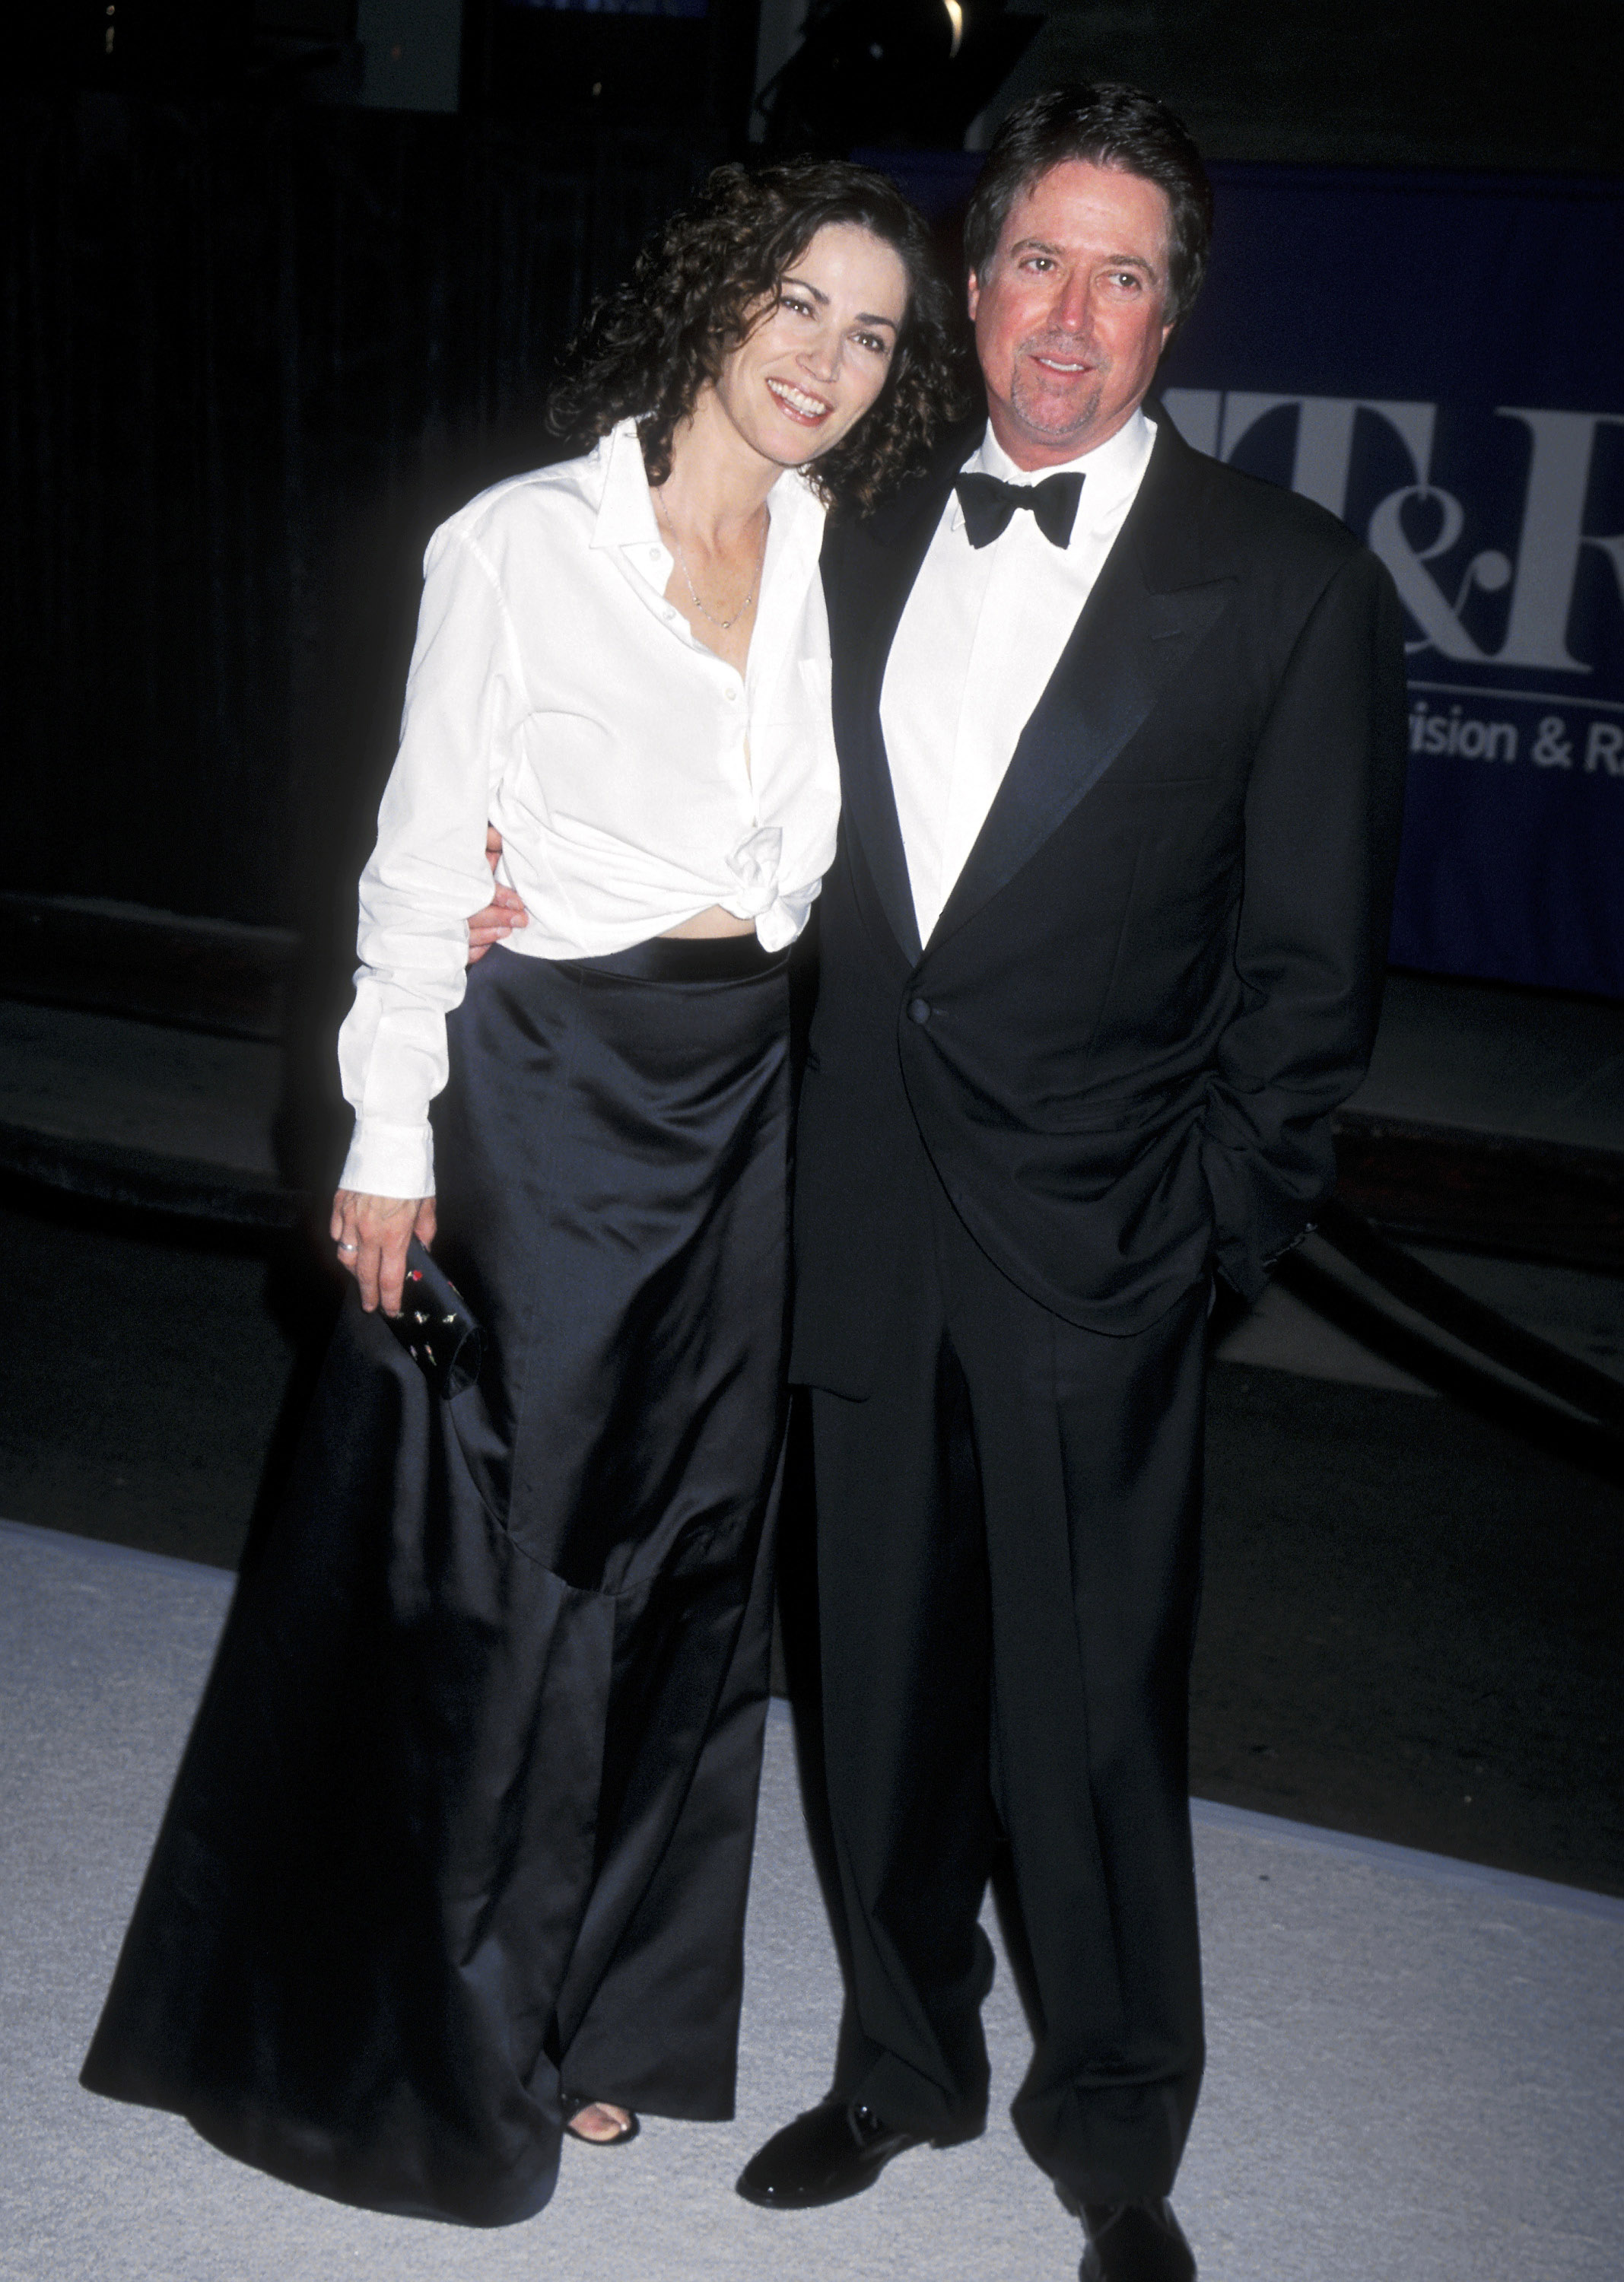 Kim Delaney and Alan Barnette during Museum of Television & Radio's 5th Annual Gala in Beverly Hills, California, on September 24, 2000 | Source: Getty Images